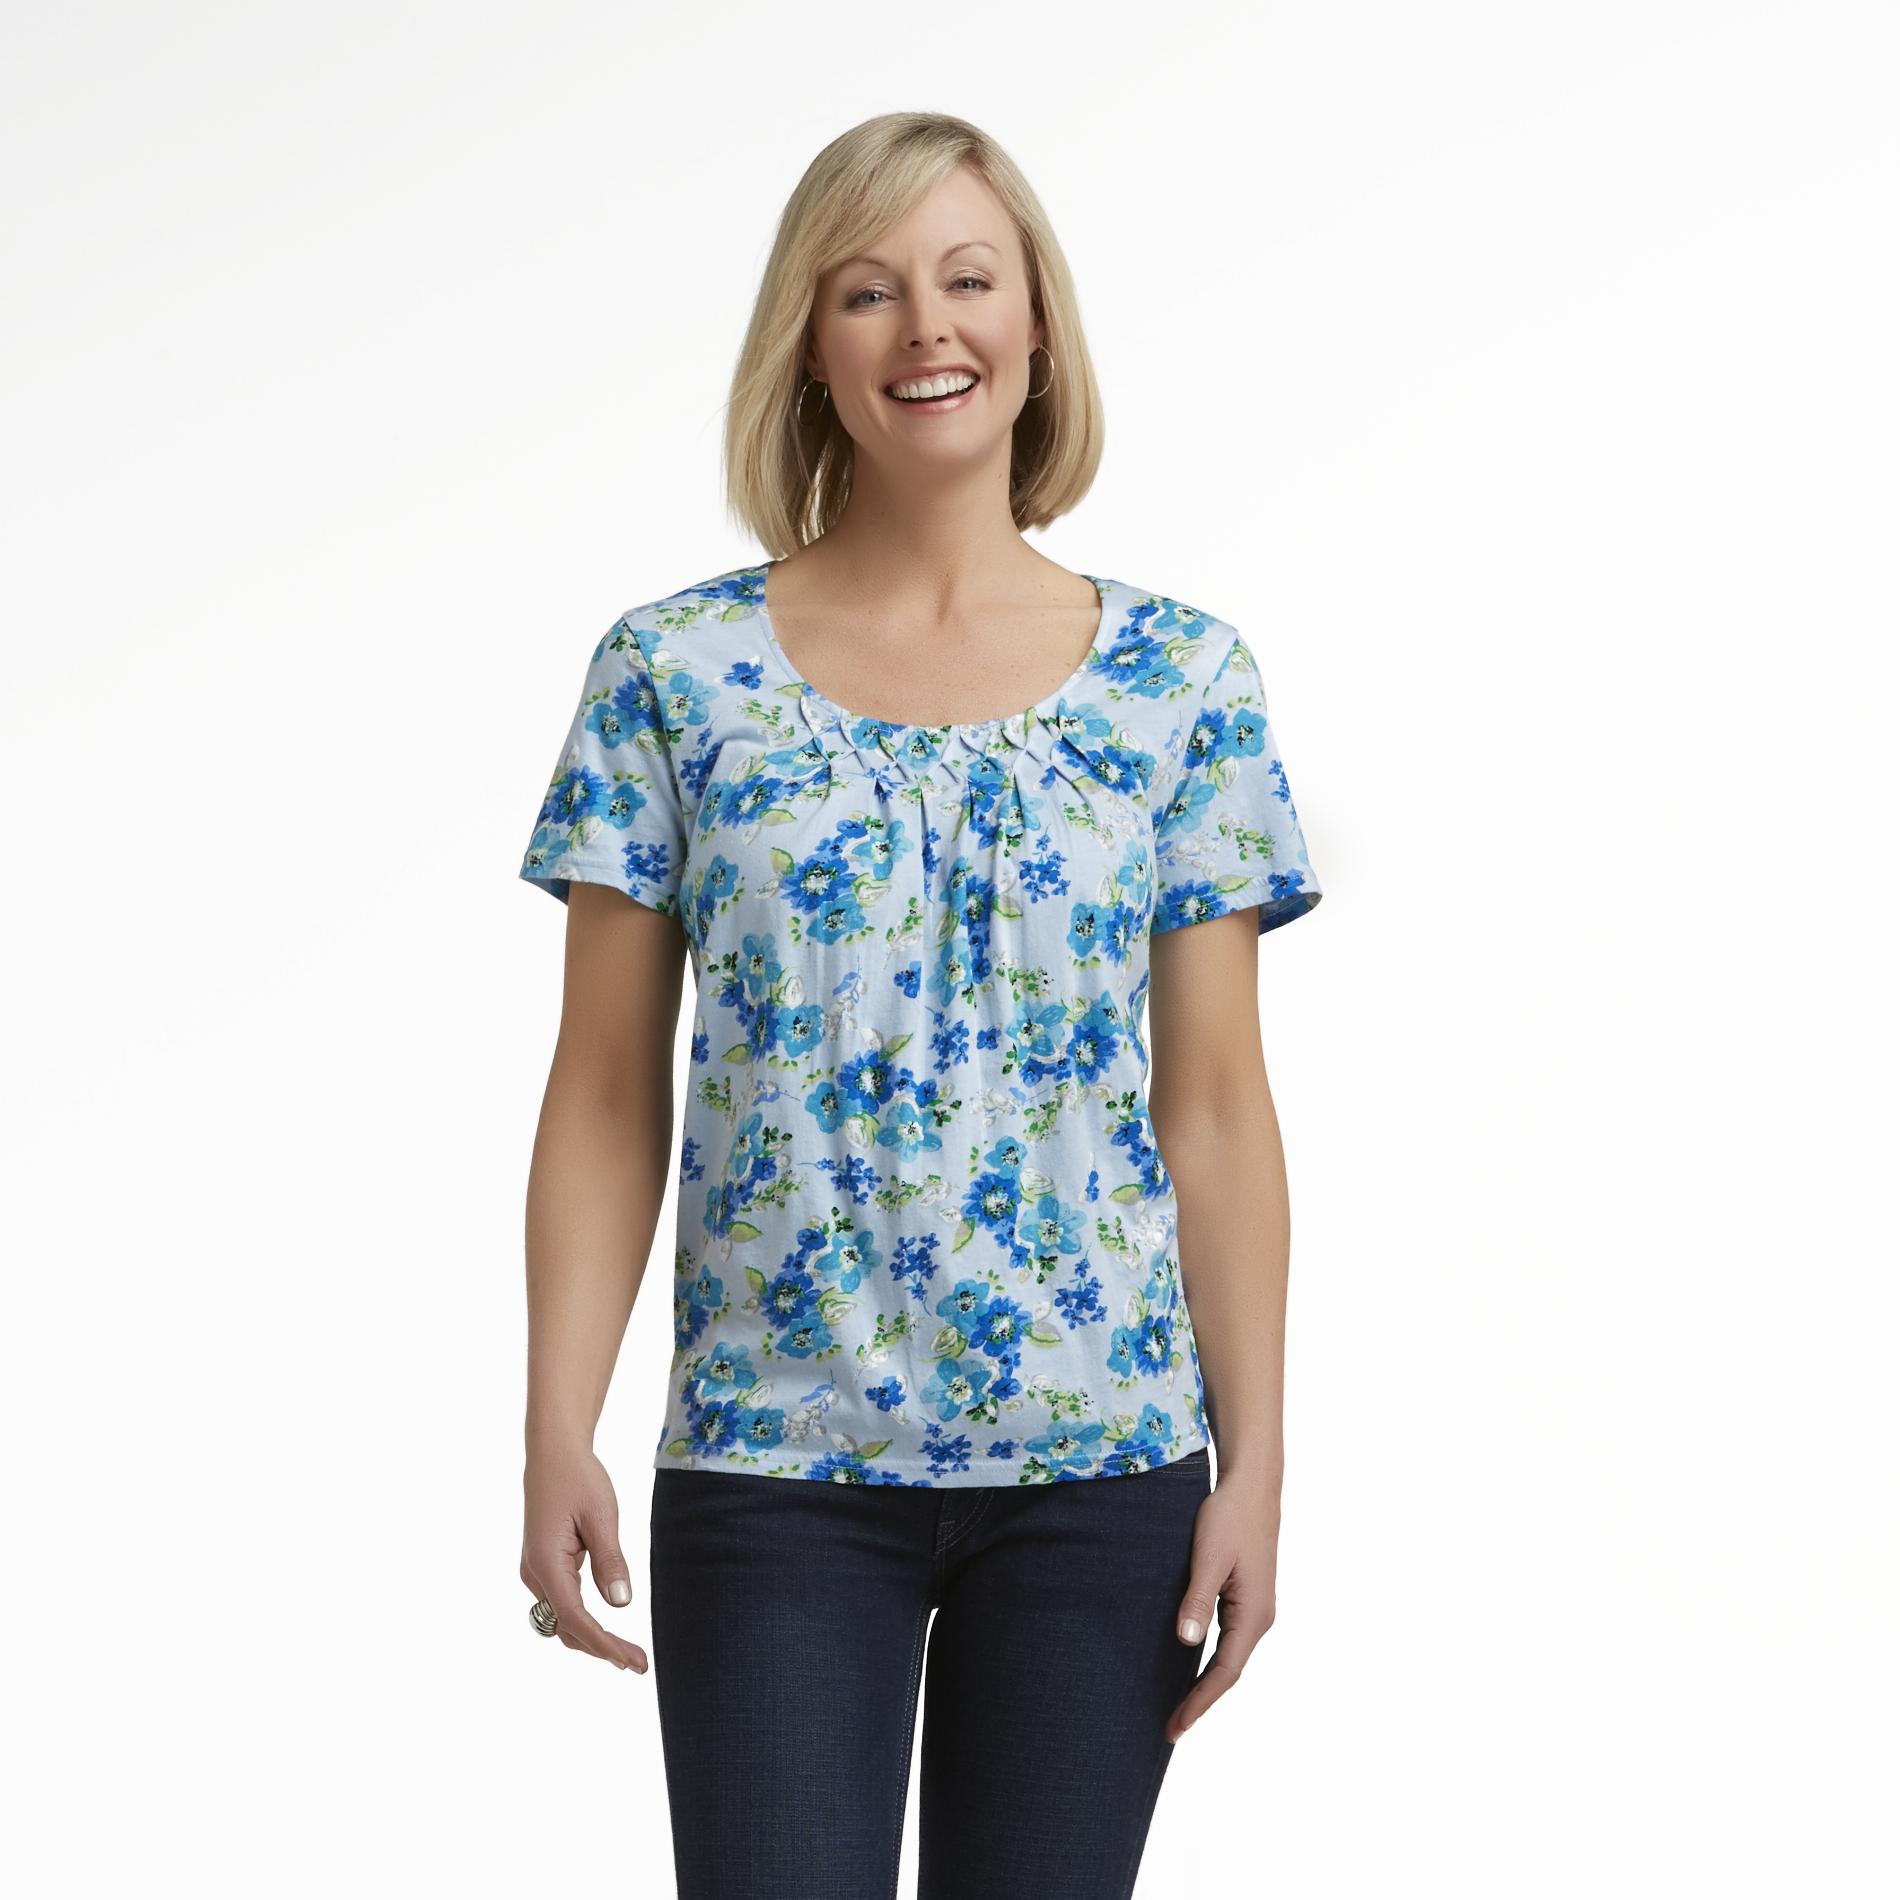 Basic Editions Women's Scoop Neck Top - Floral